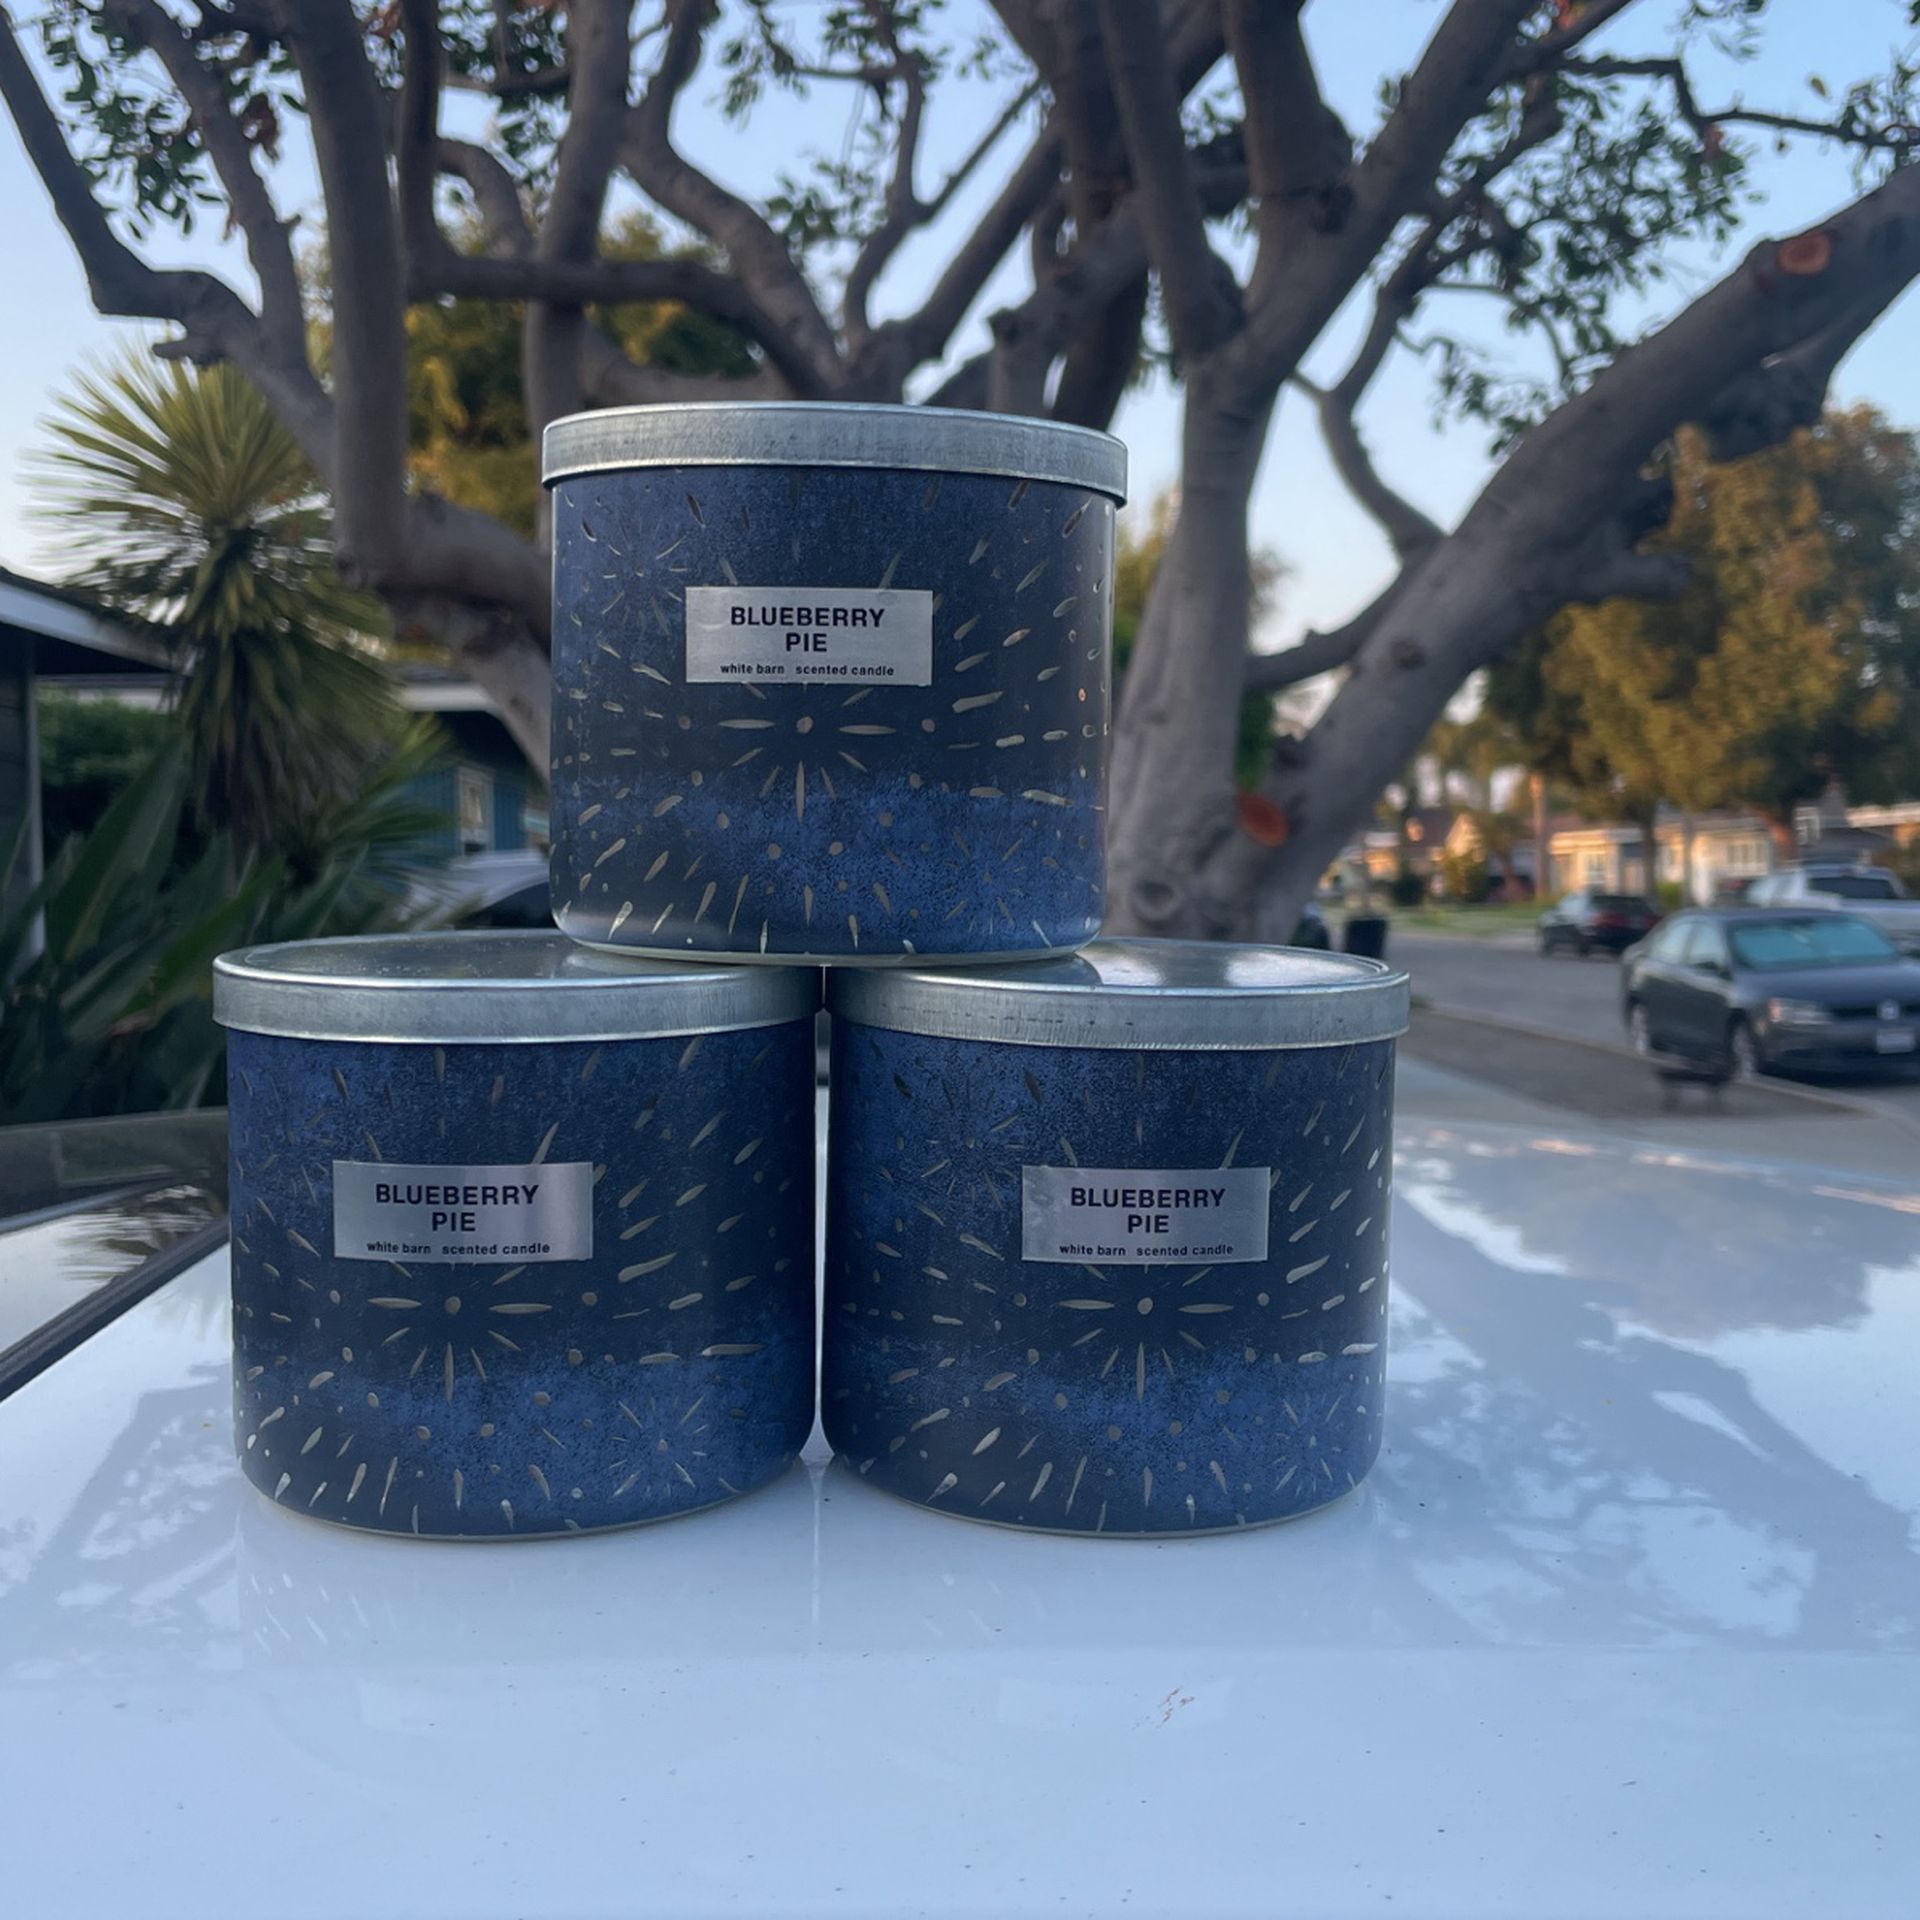 New! $20 For All 3, Blueberry Pie Scented 3 Wick Candles 